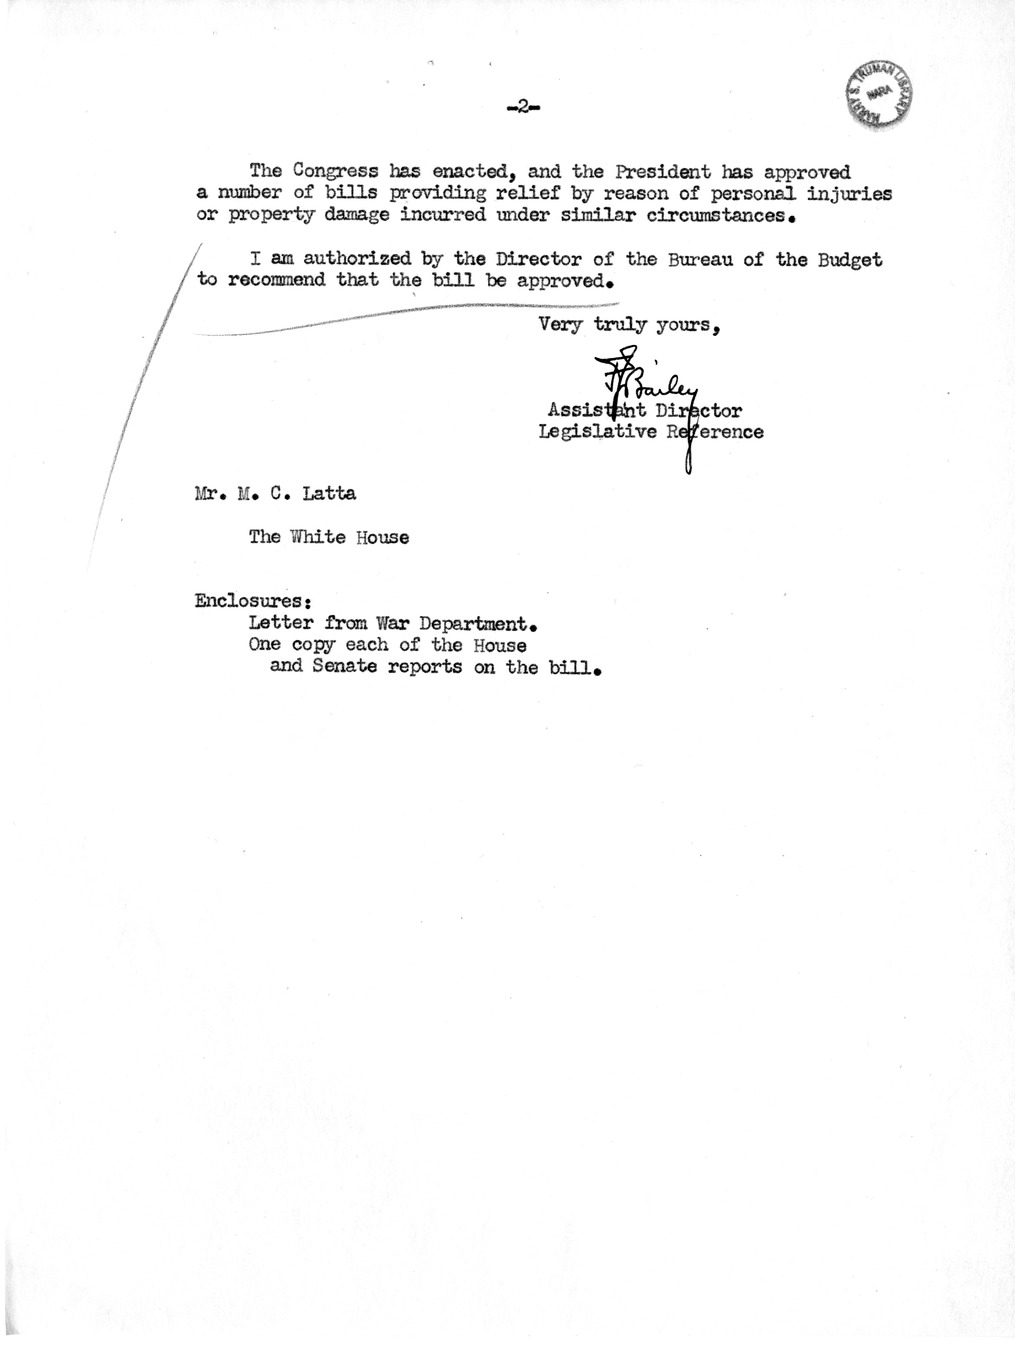 Memorandum from Frederick J. Bailey to M. C. Latta, H. R. 2244, For the Relief of Edward W. Thurber, with Attachments